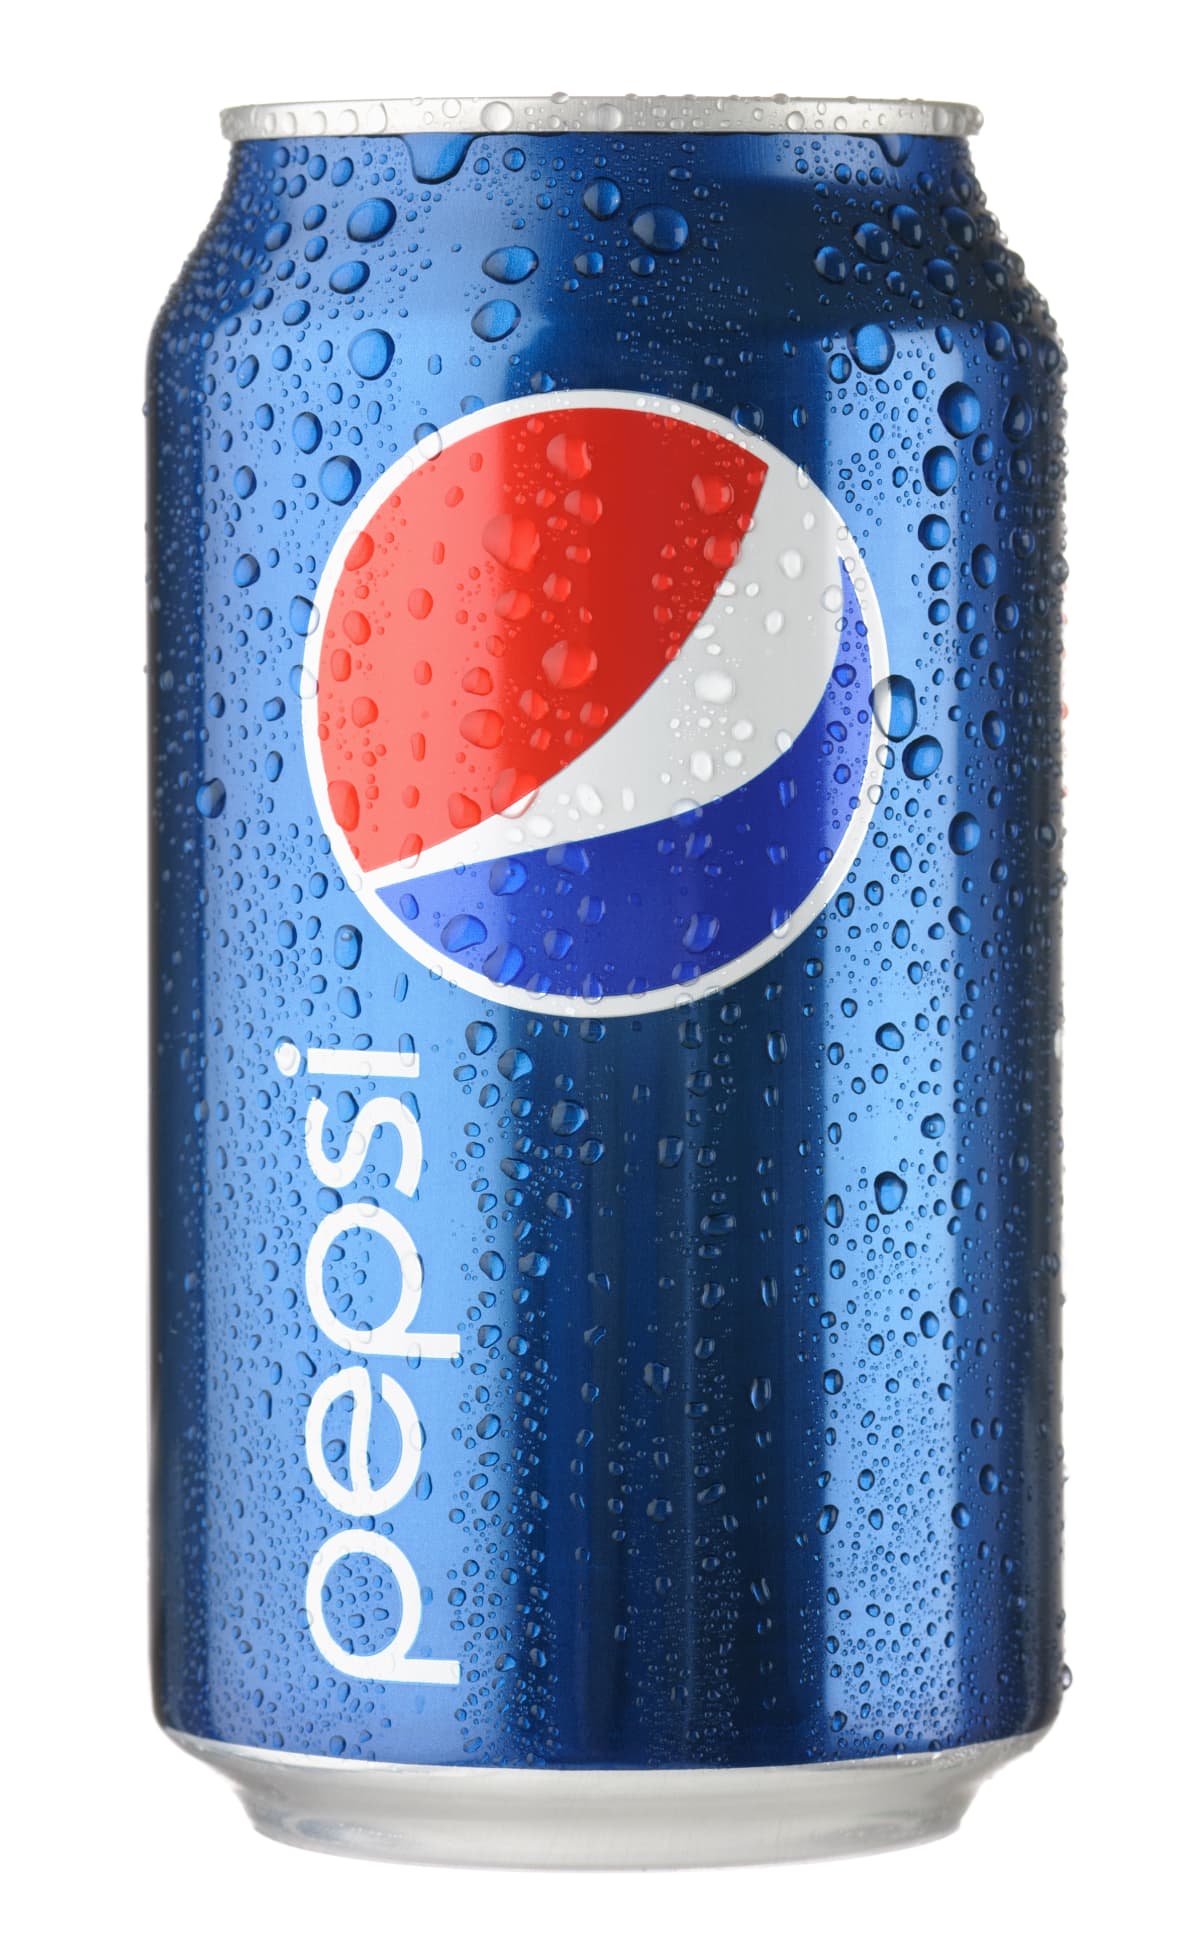 A can of Pepsi.